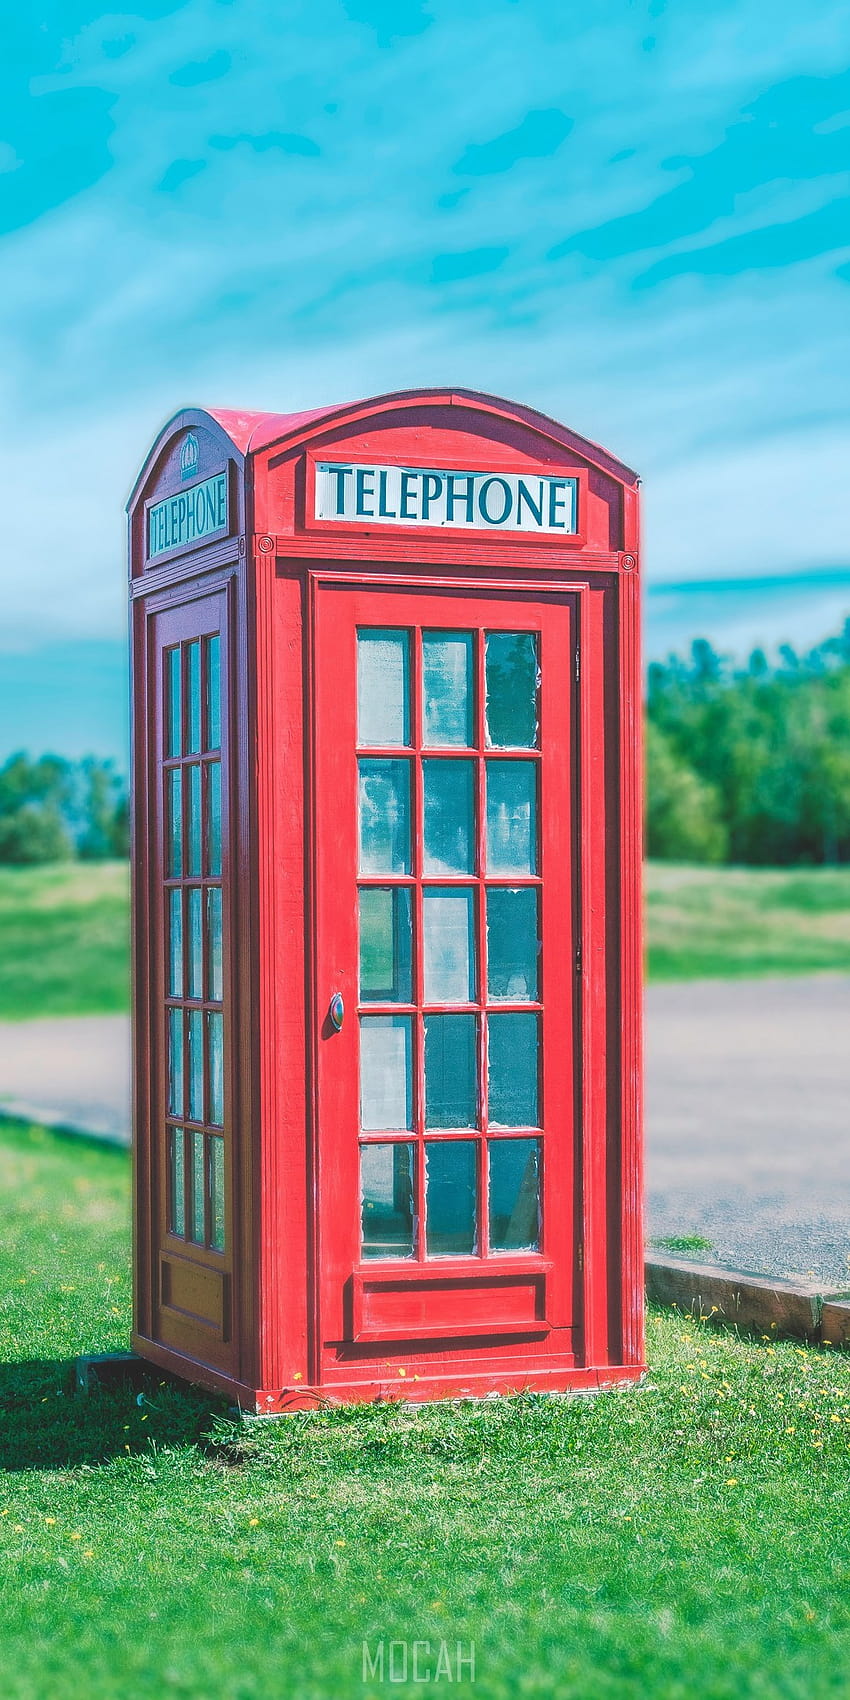 266739 a red telephone booth sits on green grass against a blue sky, telephone booth in grass, Samsung Galaxy Note 10 Lite , 1080x2400 HD phone wallpaper